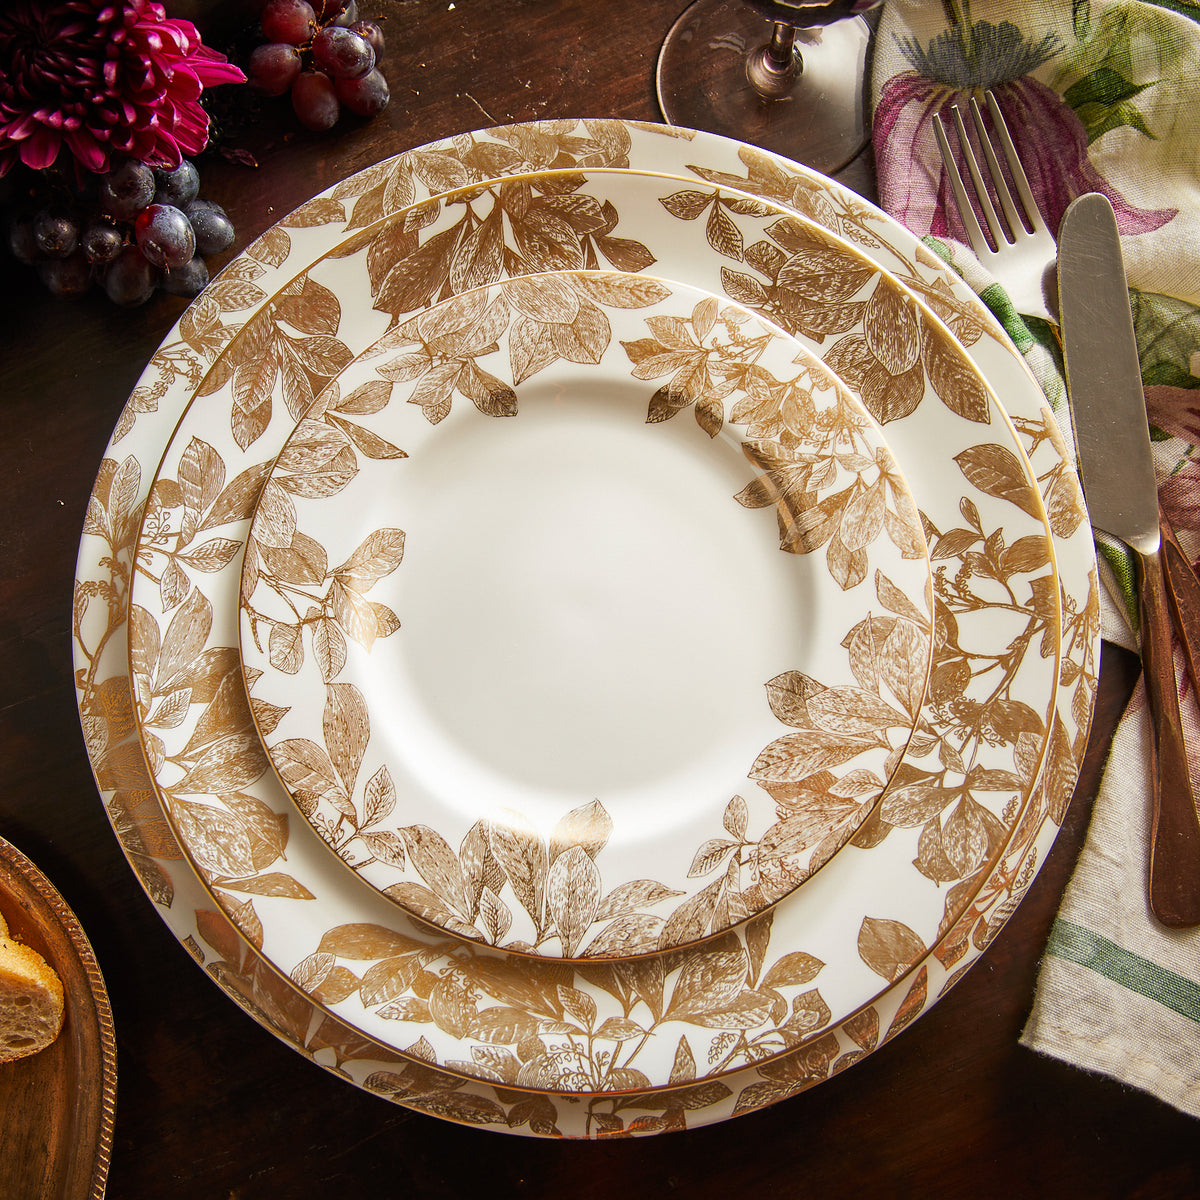 A beautiful Arbor Rimmed Charger Gold with an elegant floral pattern by Caskata Artisanal Home.